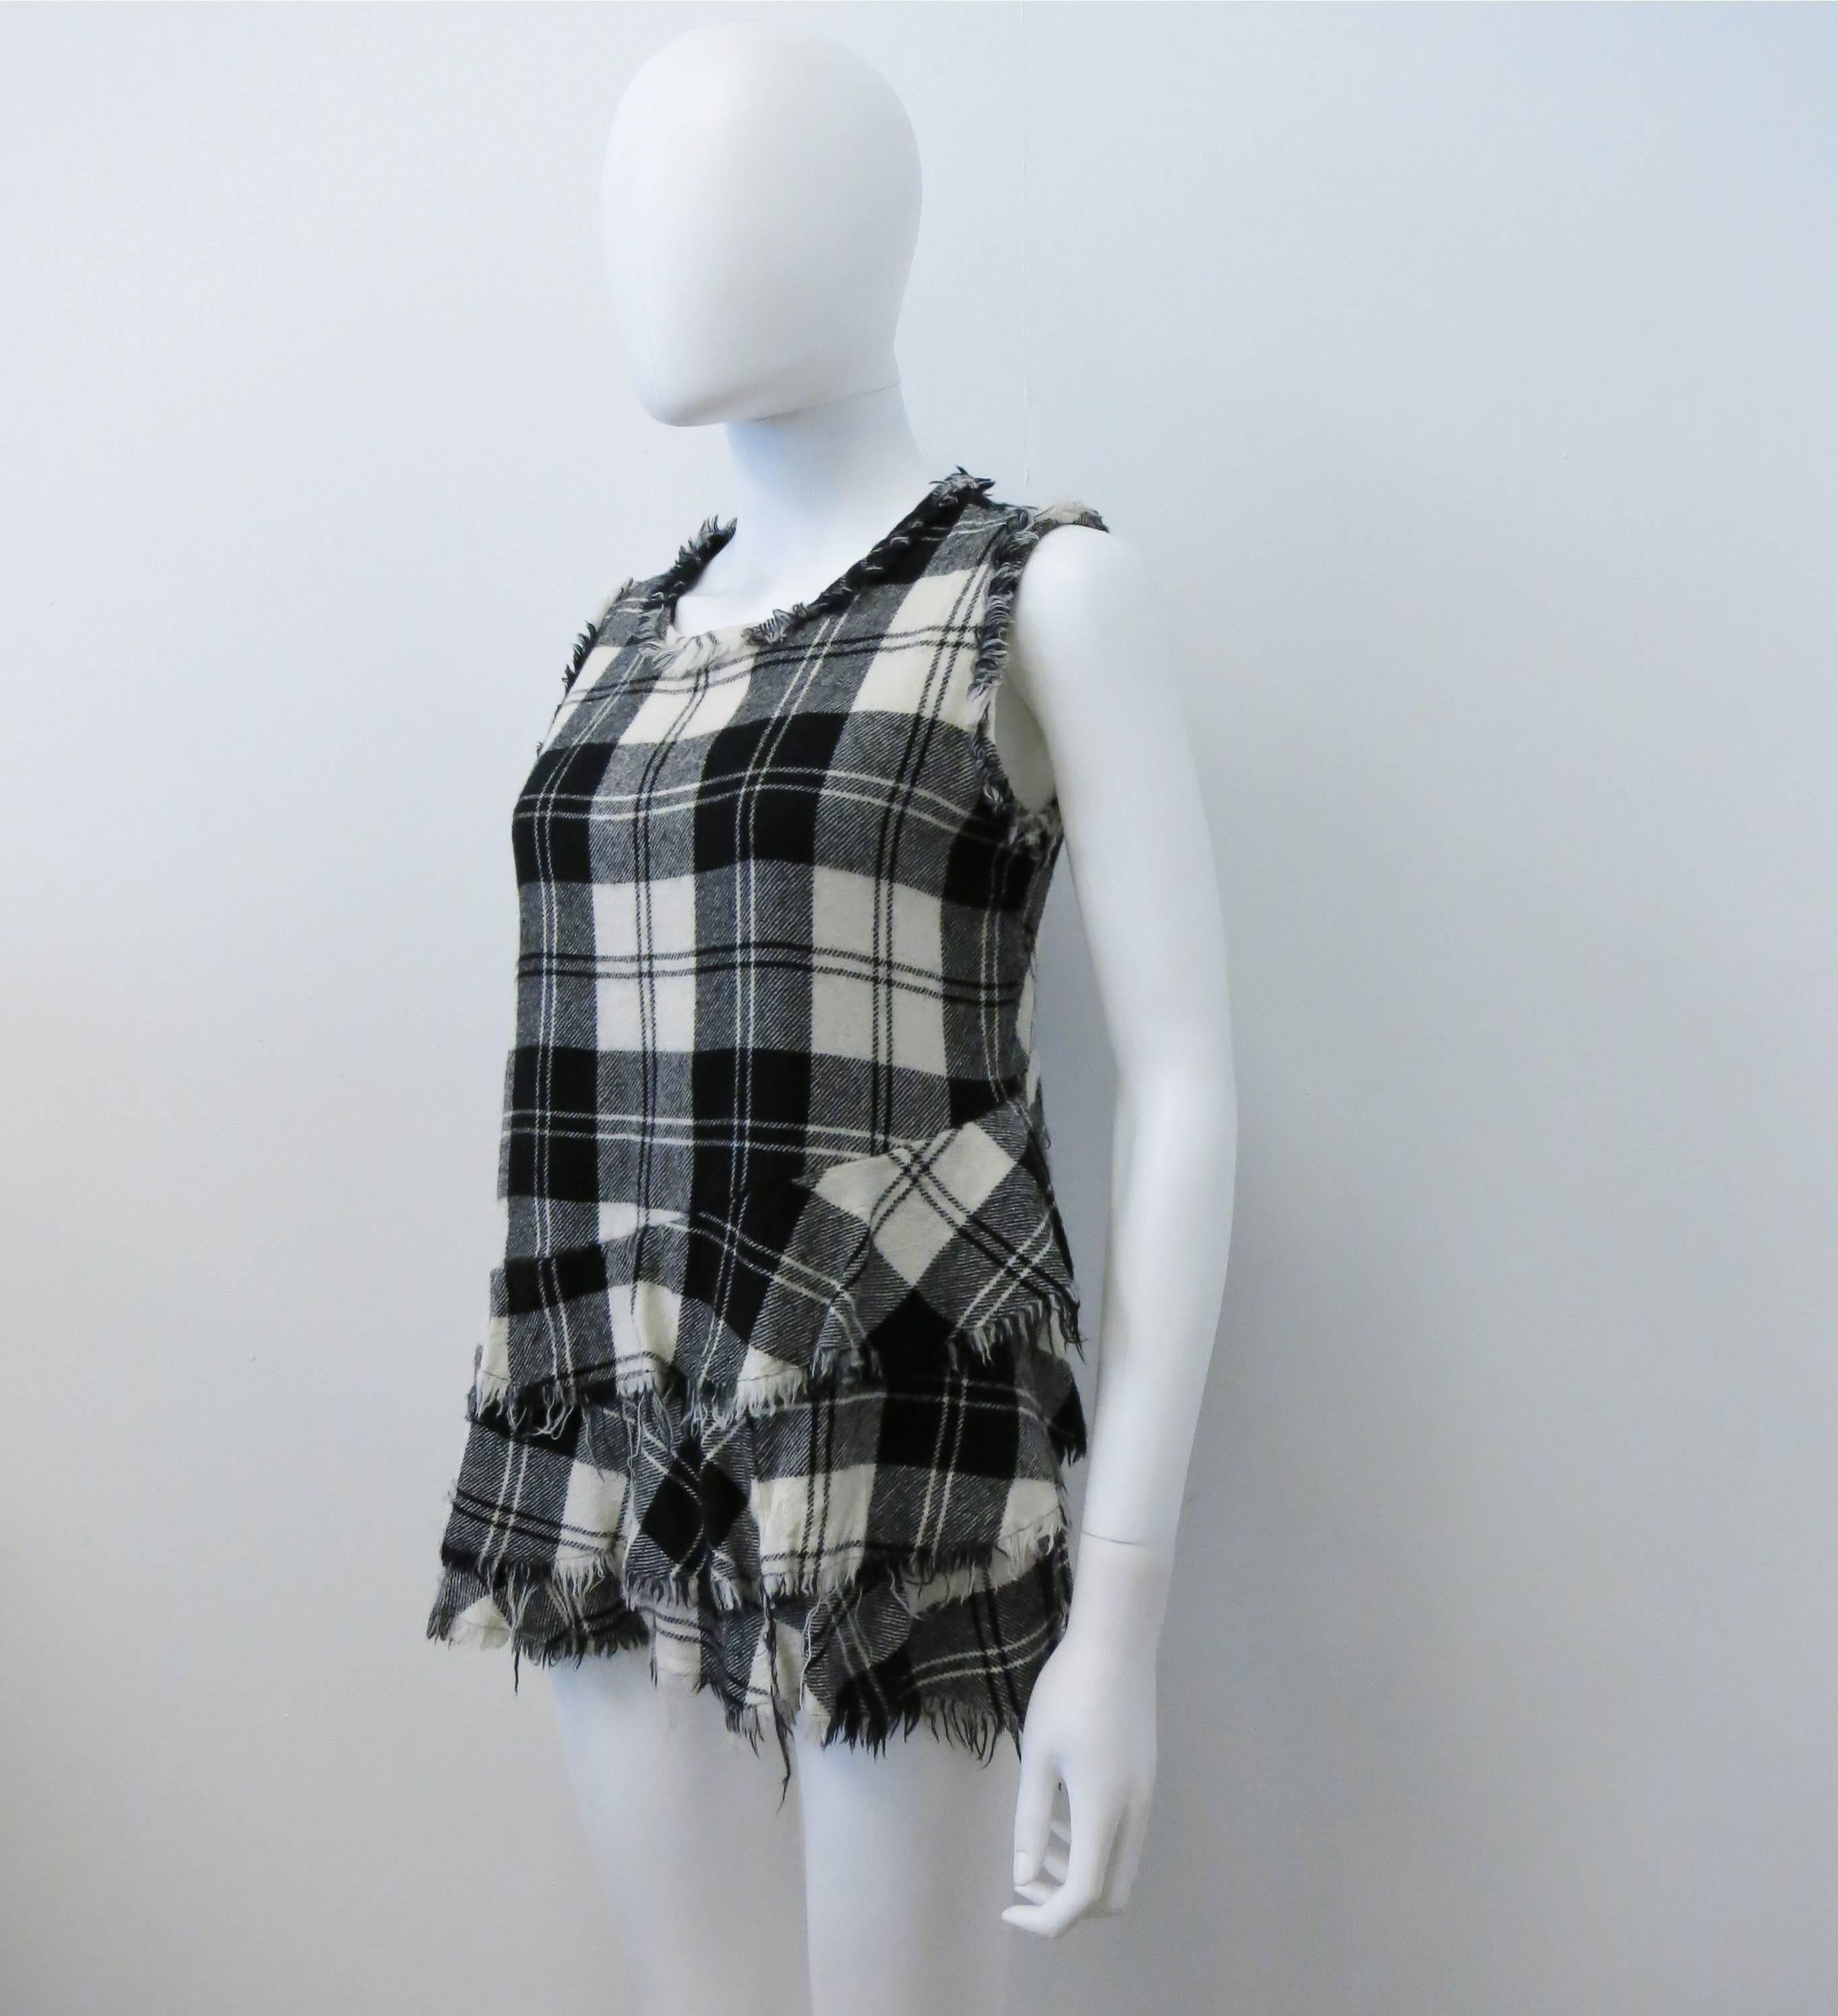 A black and white plaid wool vest top from the 2004 Junya Watanabe MAN line. The sleeveless top has a simple shape but is given a Junya Watanabe, punk twist with raw, frayed edges and a circular frill that goe around the bottom half of the top